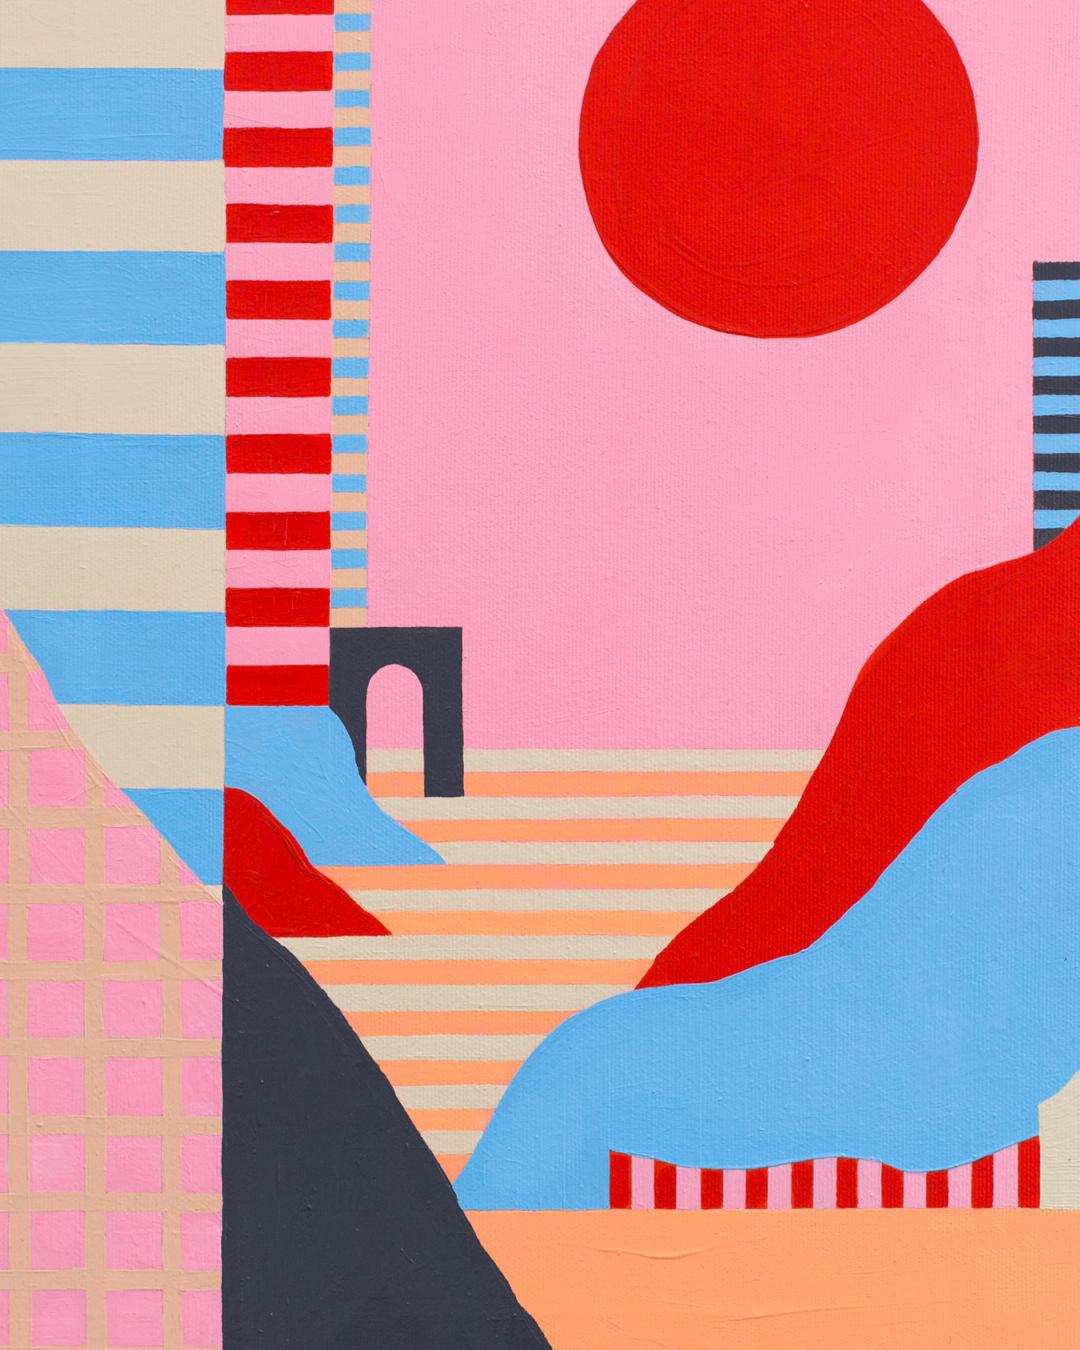 Mireia Ruiz has a special connection with everything that surrounds her, which she explores through color and form, creating bright colorful compositions in contrast with a cold and globalised world. Her ultimate goal with art is to bring joy and